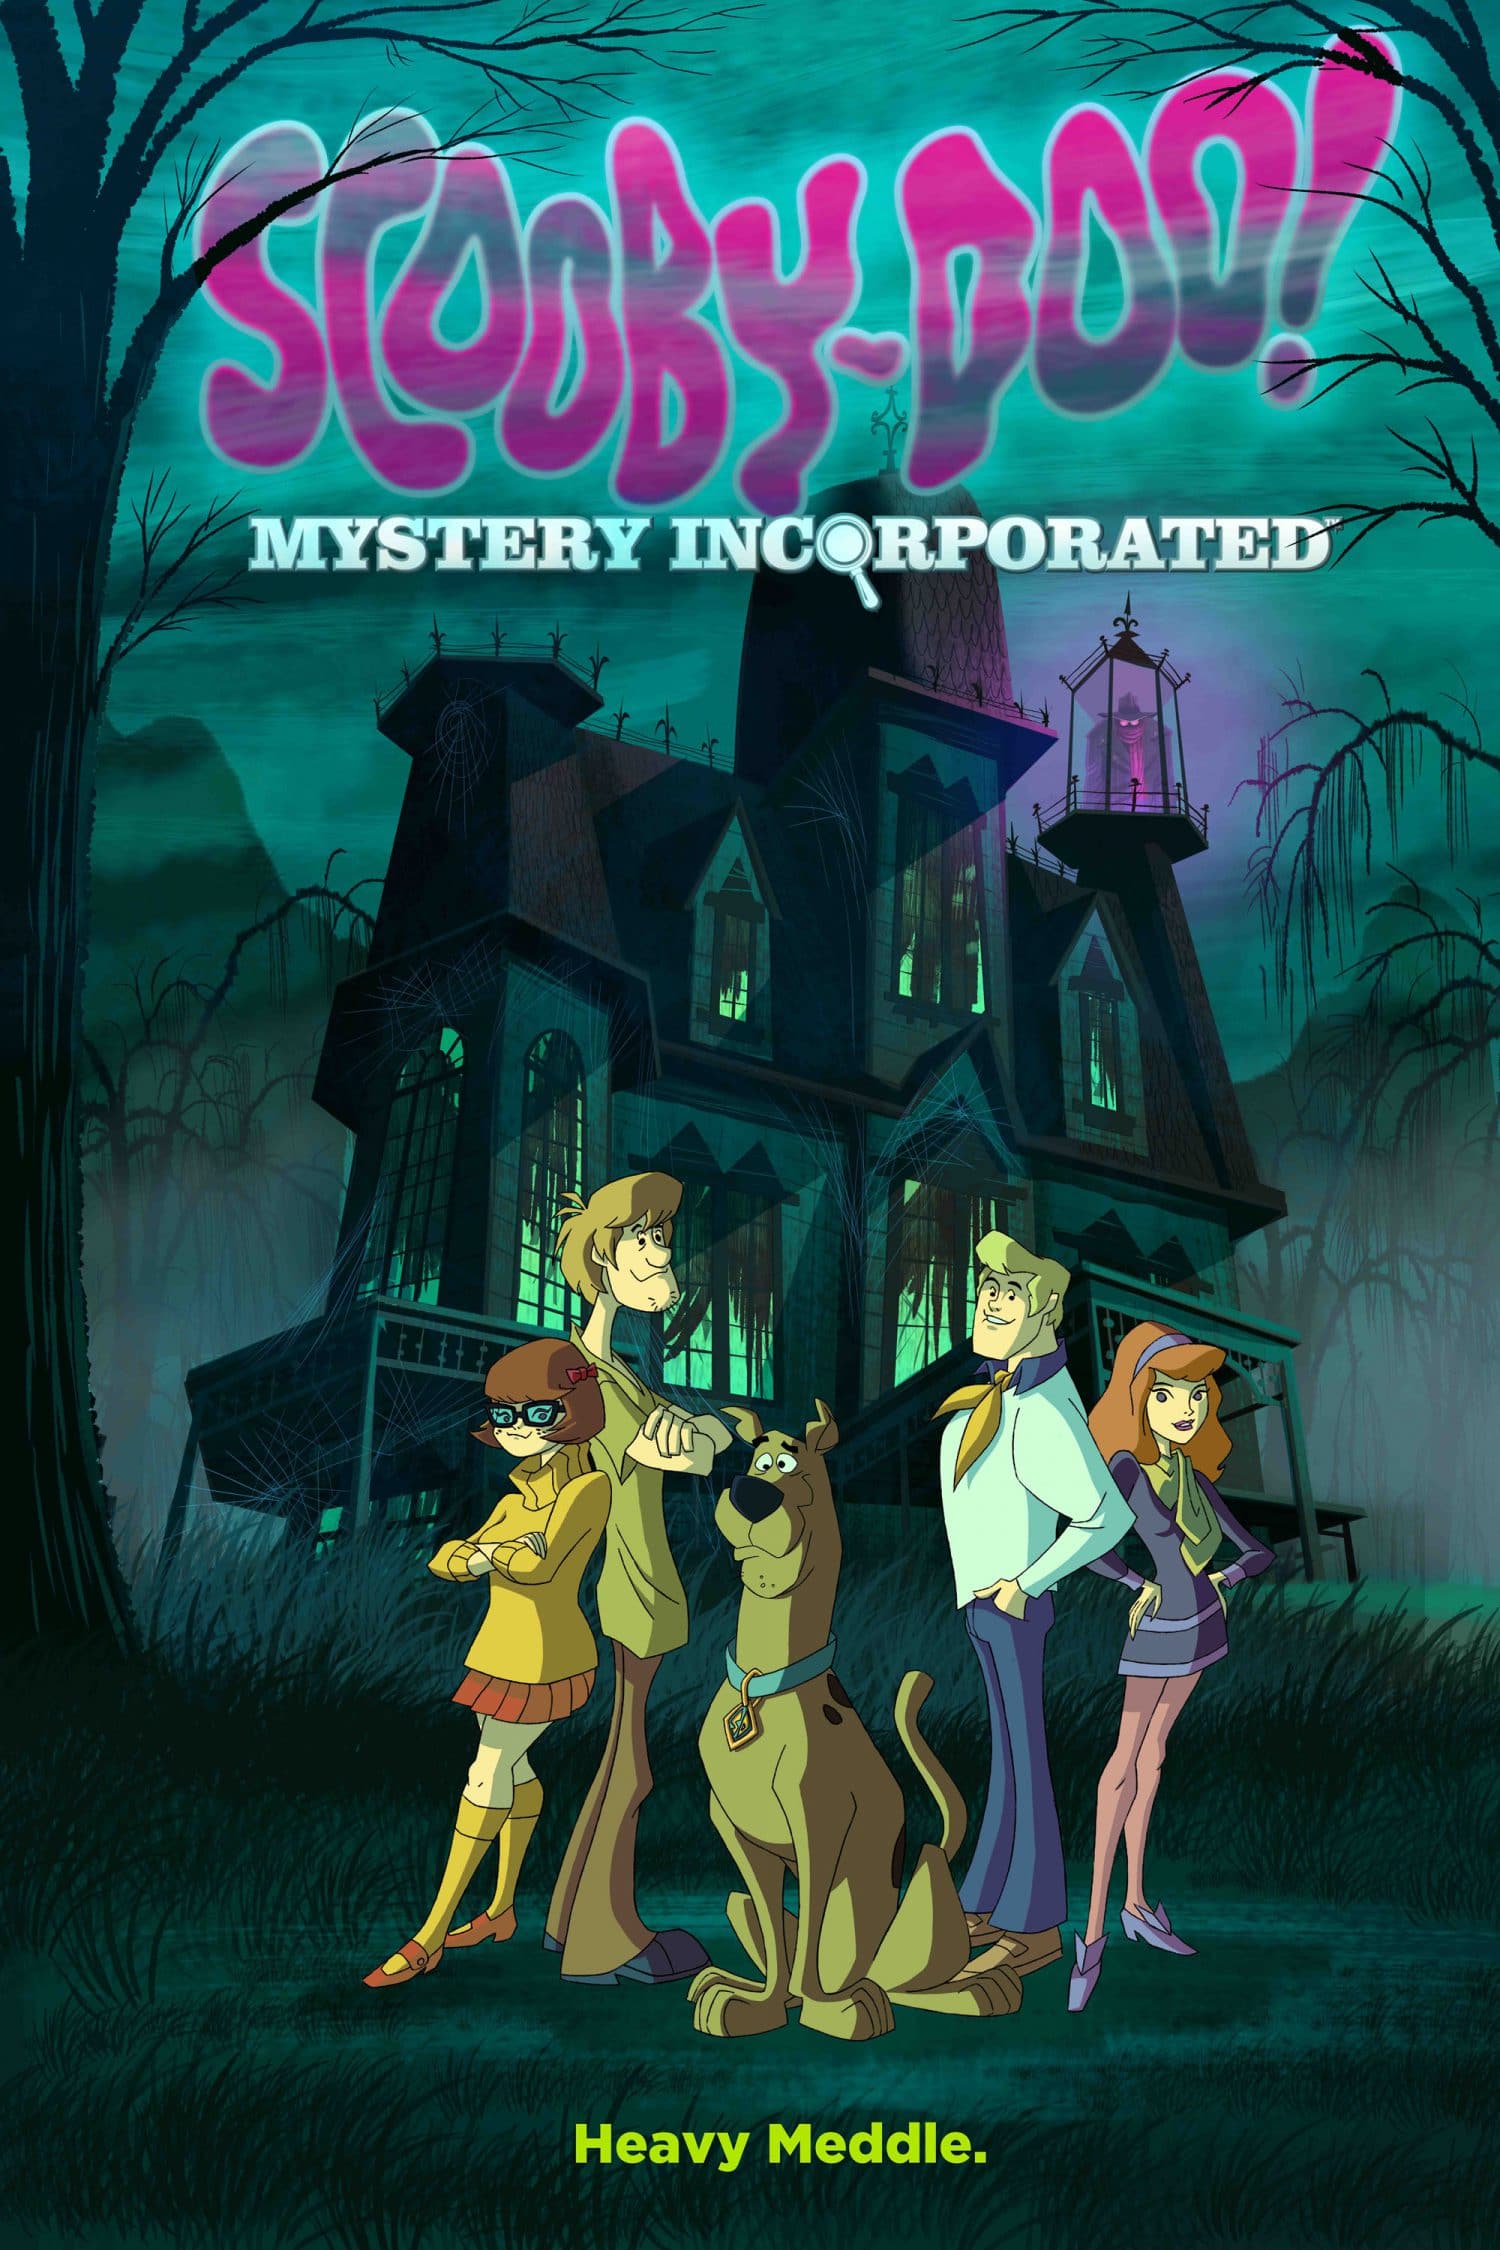 Scooby-Doo Mystery Incorporated